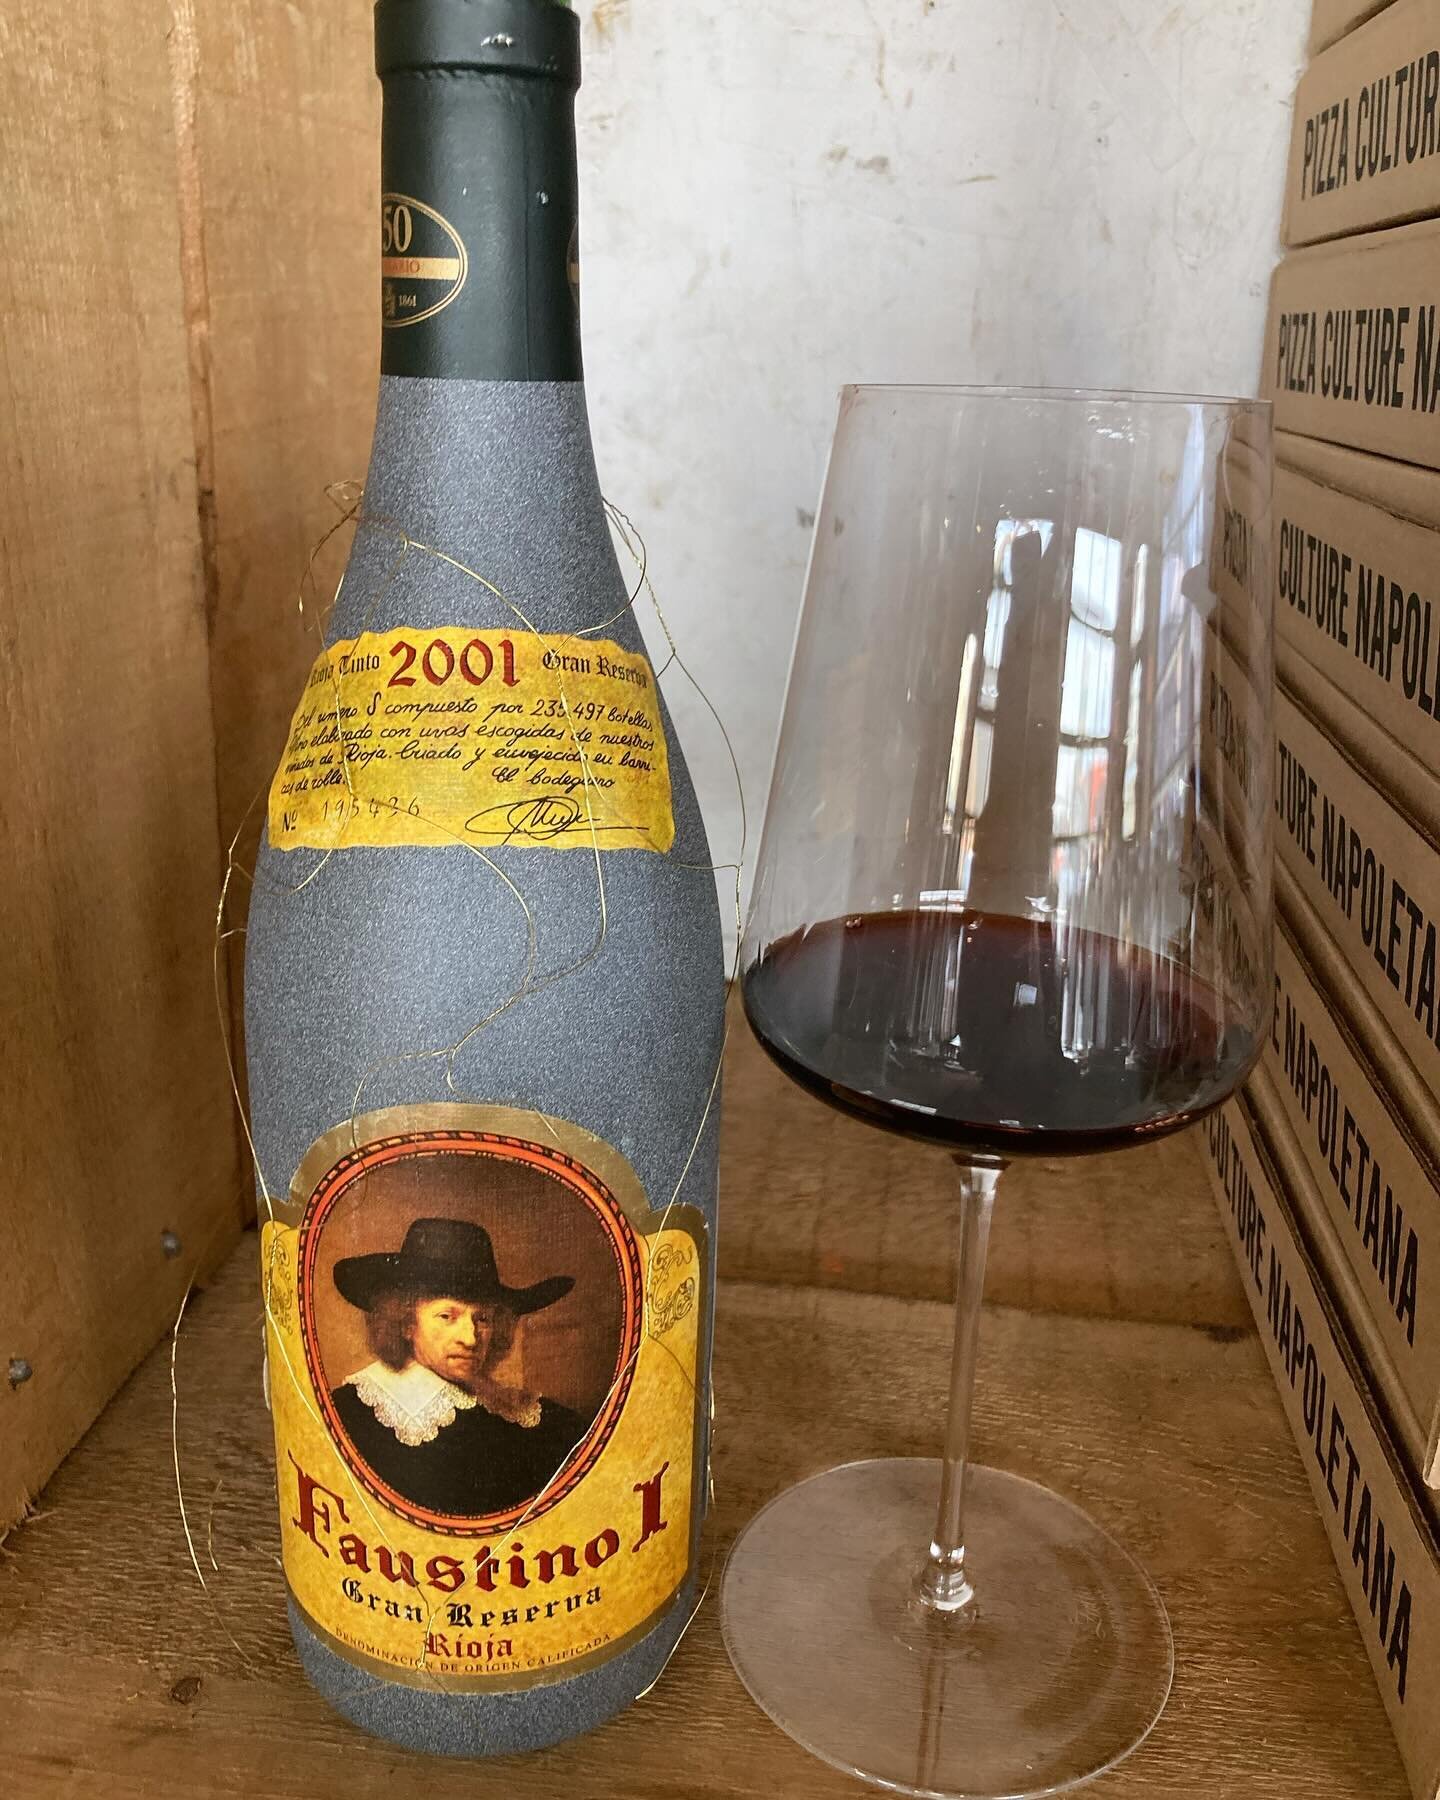 This beautiful 2001 Faustino Gran Reserva Rioja is drinking in its prime. It is a very special bottle. It was named #1 Wine of the Year by Decanter Magazine in 2013! Thank you @salt_and_smoke_charcuterie for sharing this amazing wine! #soulvinesomm #